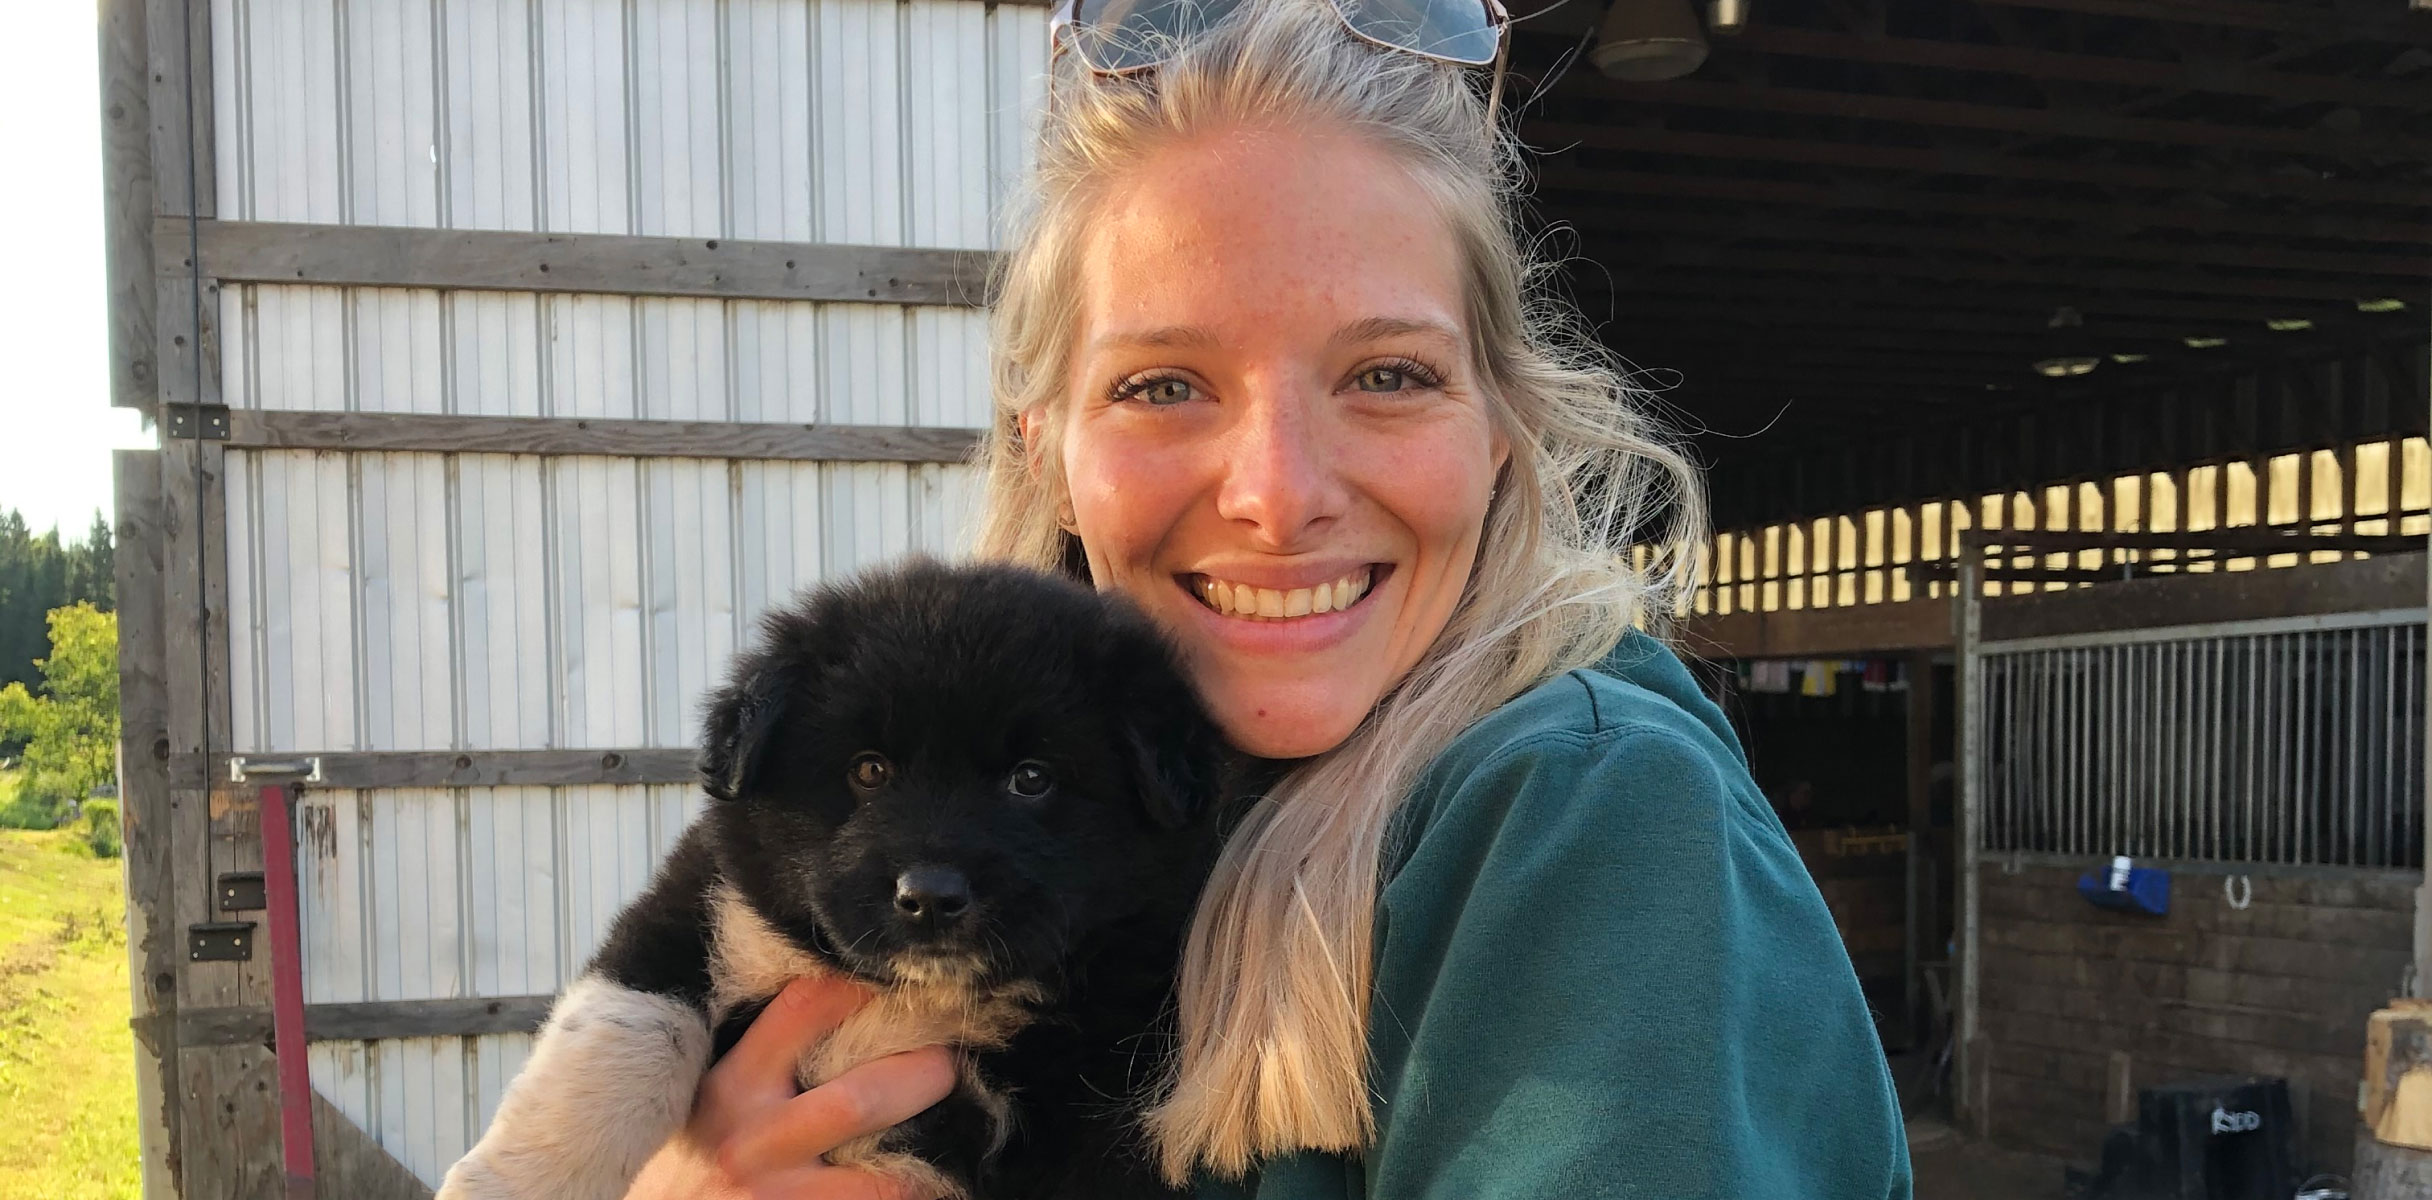 Blonde woman with black puppy